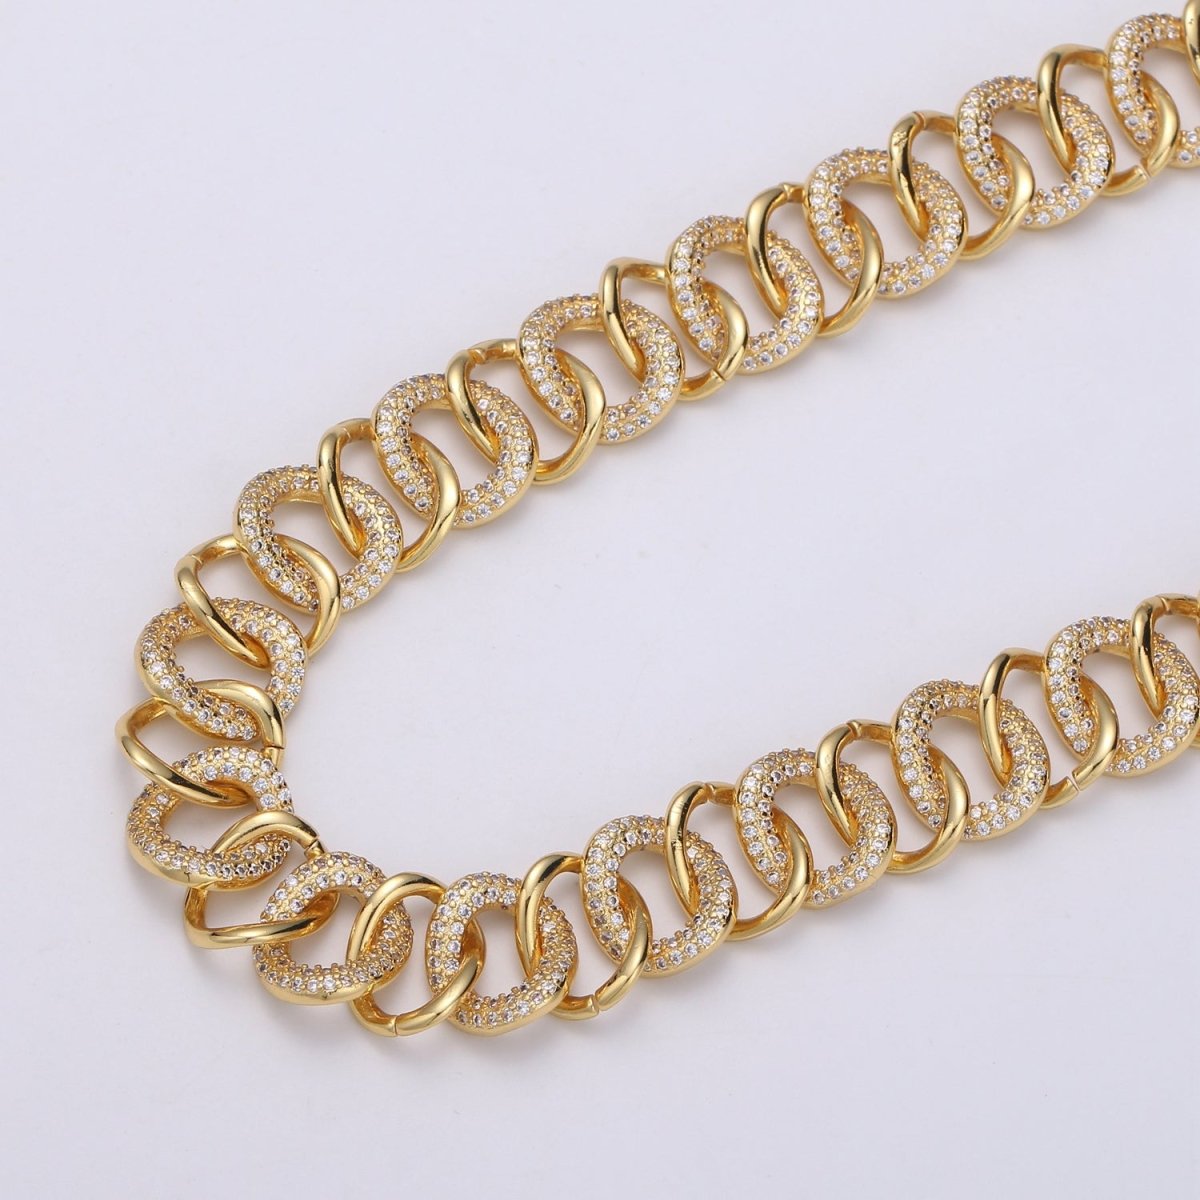 24K Gold Filled Cluster CZ CURB Rolo Chain by Yard, Sand Cubic Curb Chain, Fancy Roll Chain with Cubic Zirconia For Jewelry Making | ROLL-318 Clearance Pricing - DLUXCA